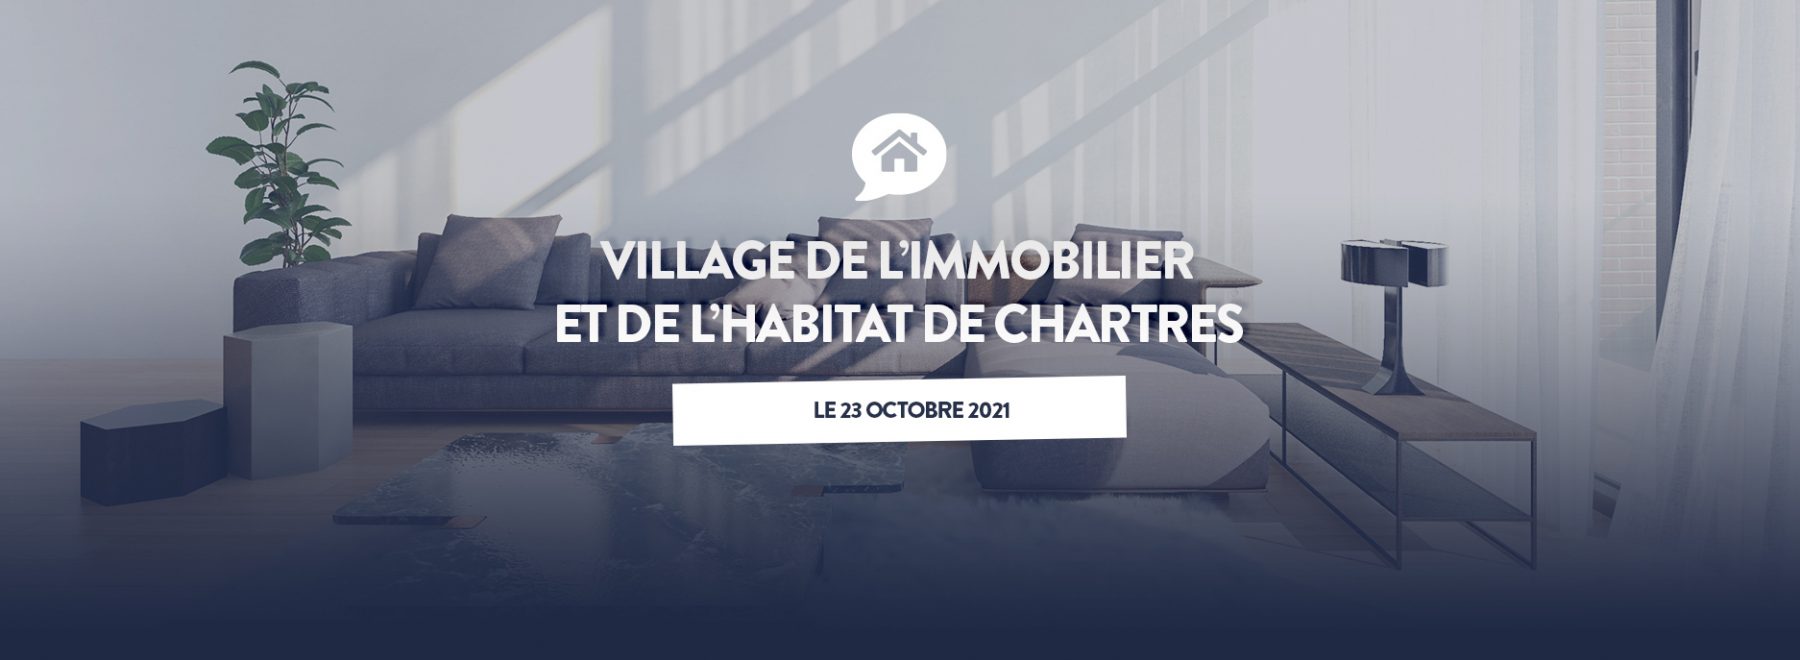 village_immobilier_chartres_2021